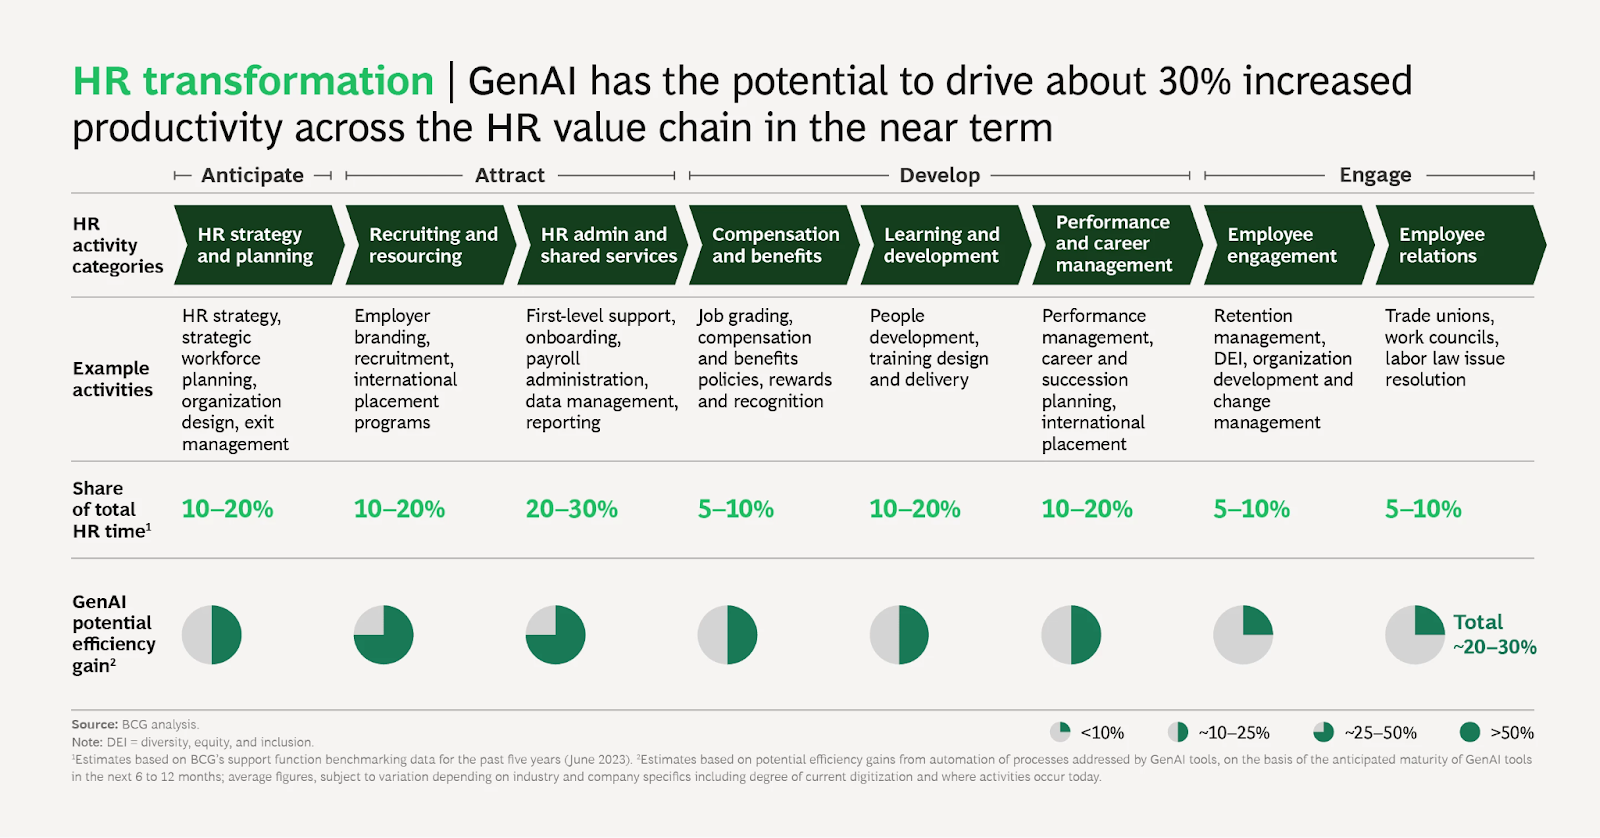 GenAI has the potential to drive about 30% increased productivity across the HR value chain in the near term. - Boston Consulting Group